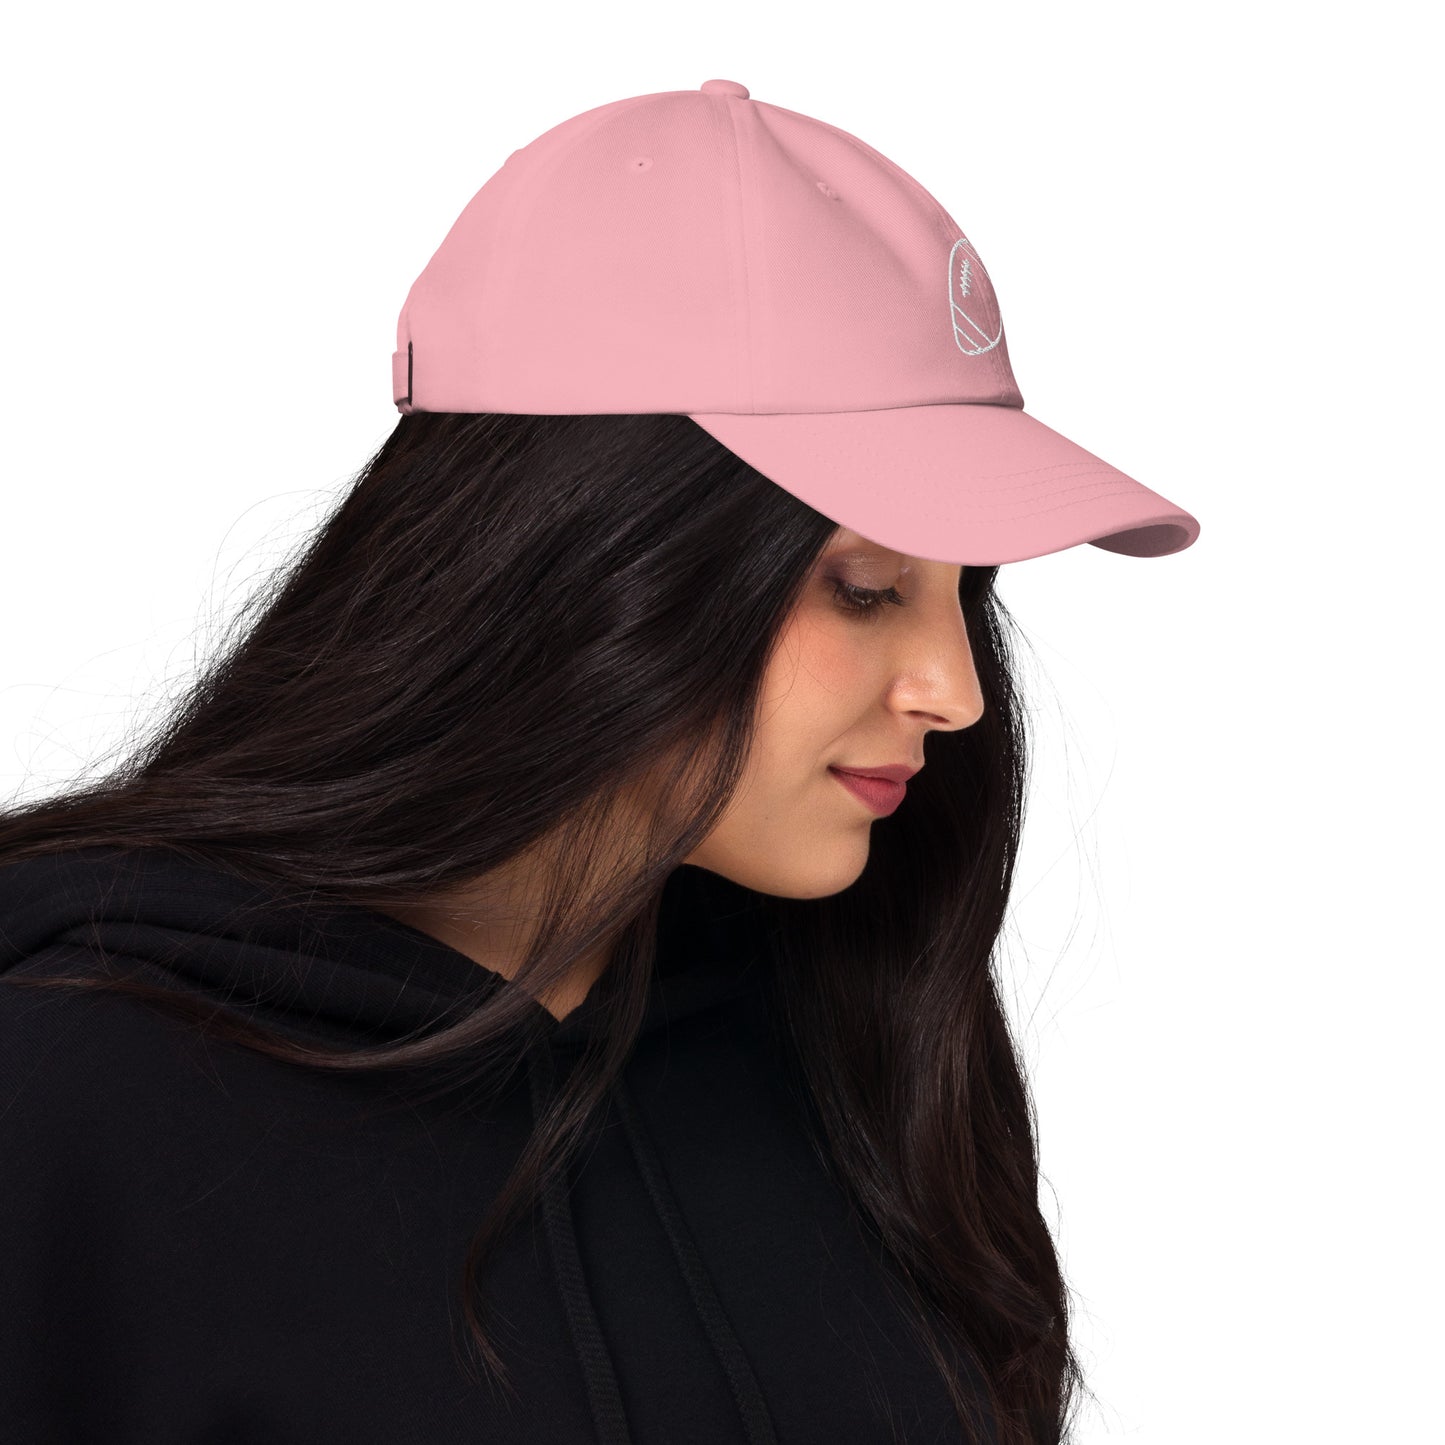 women with pink baseball cap with football